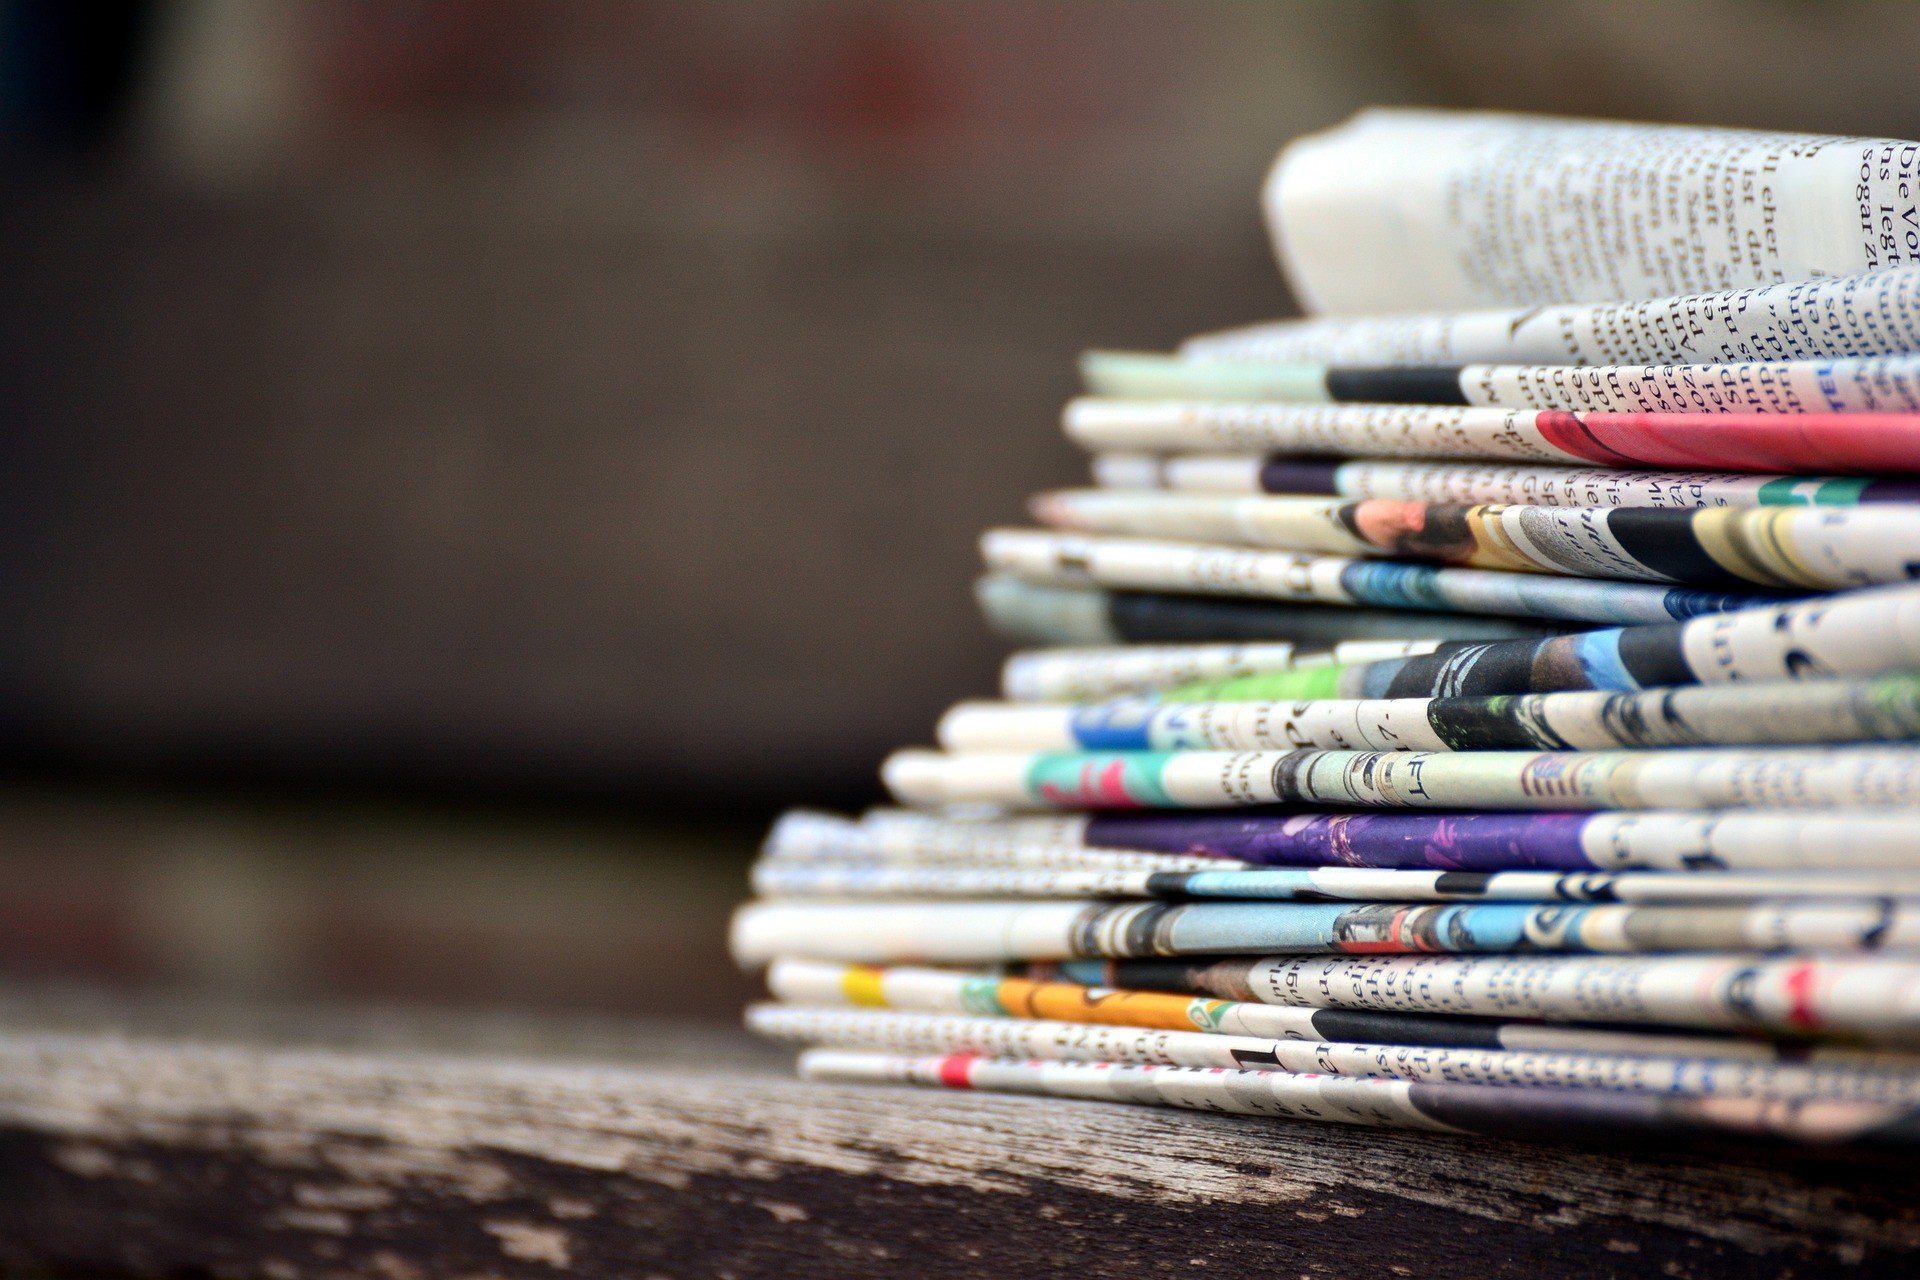 A stack of newspapers on a wooden table.